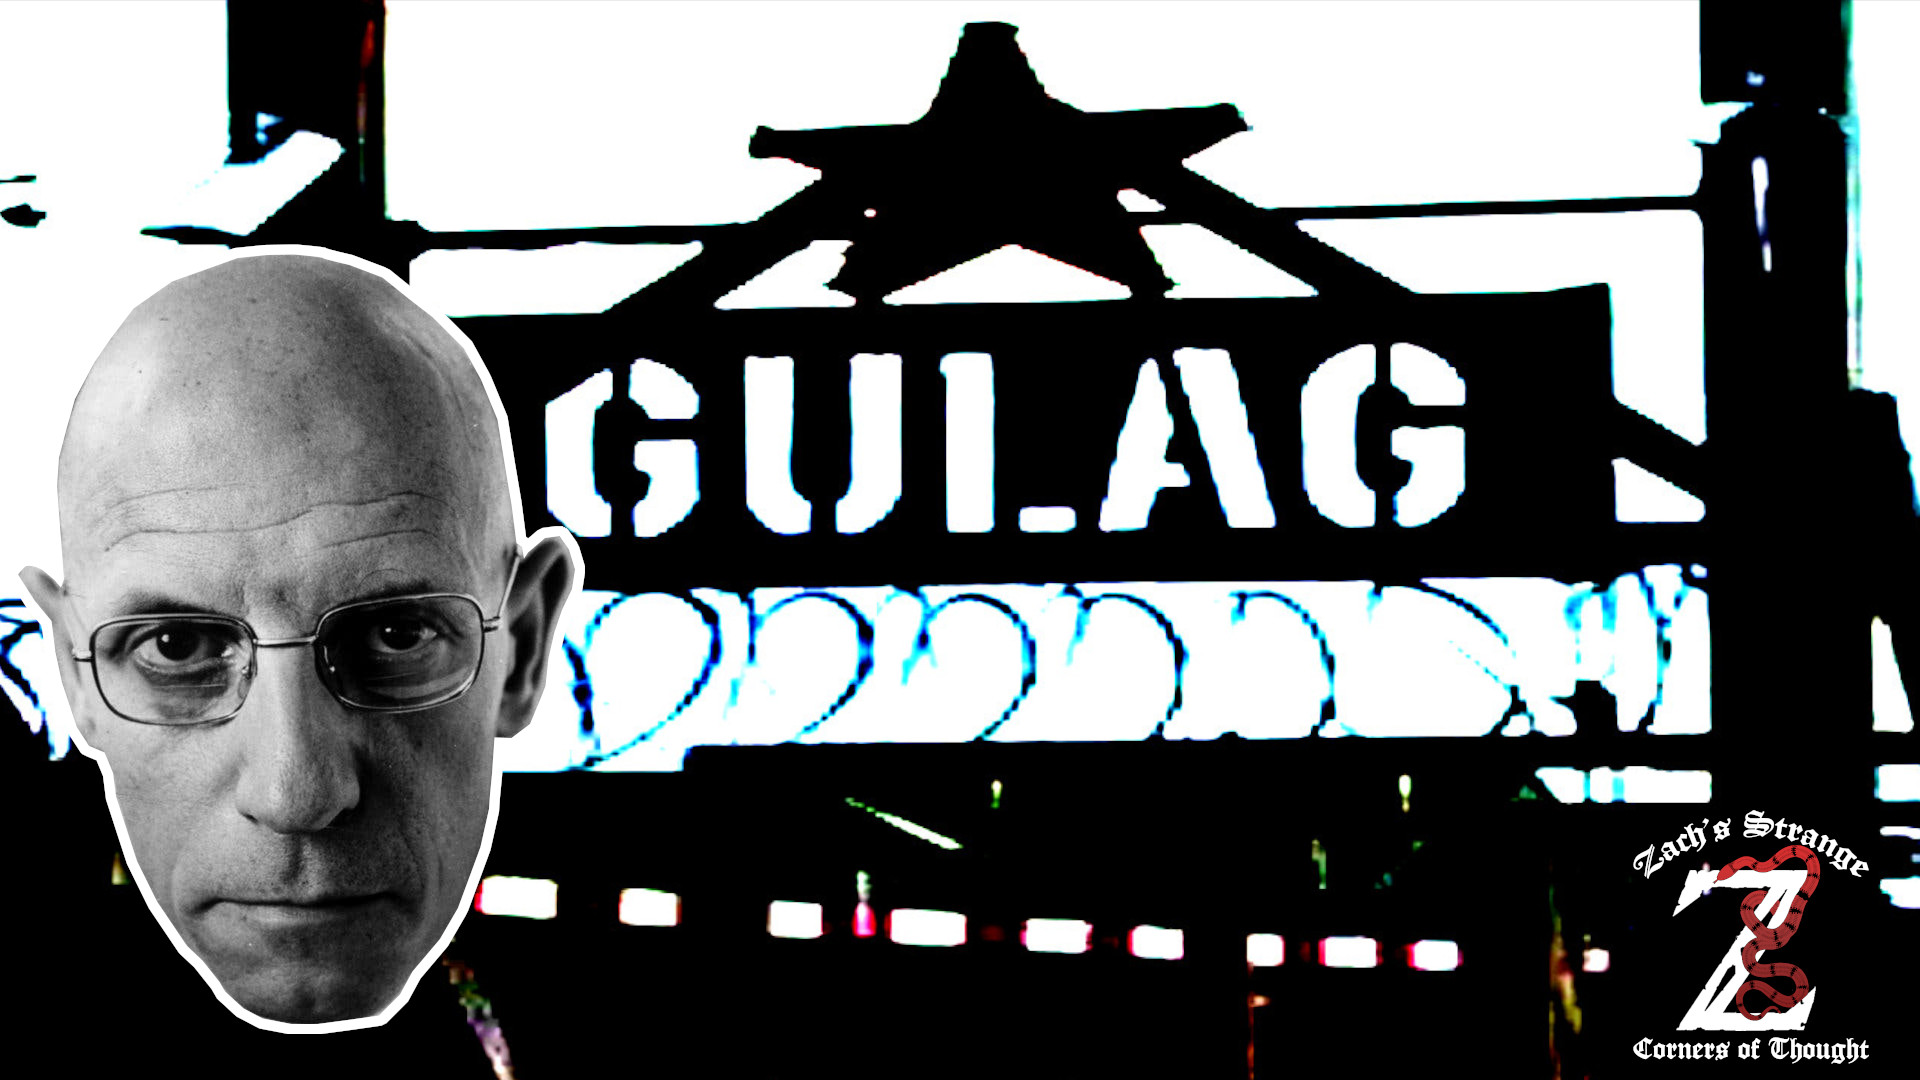 Michel Foucault's Head over a dark picture of a Gulag